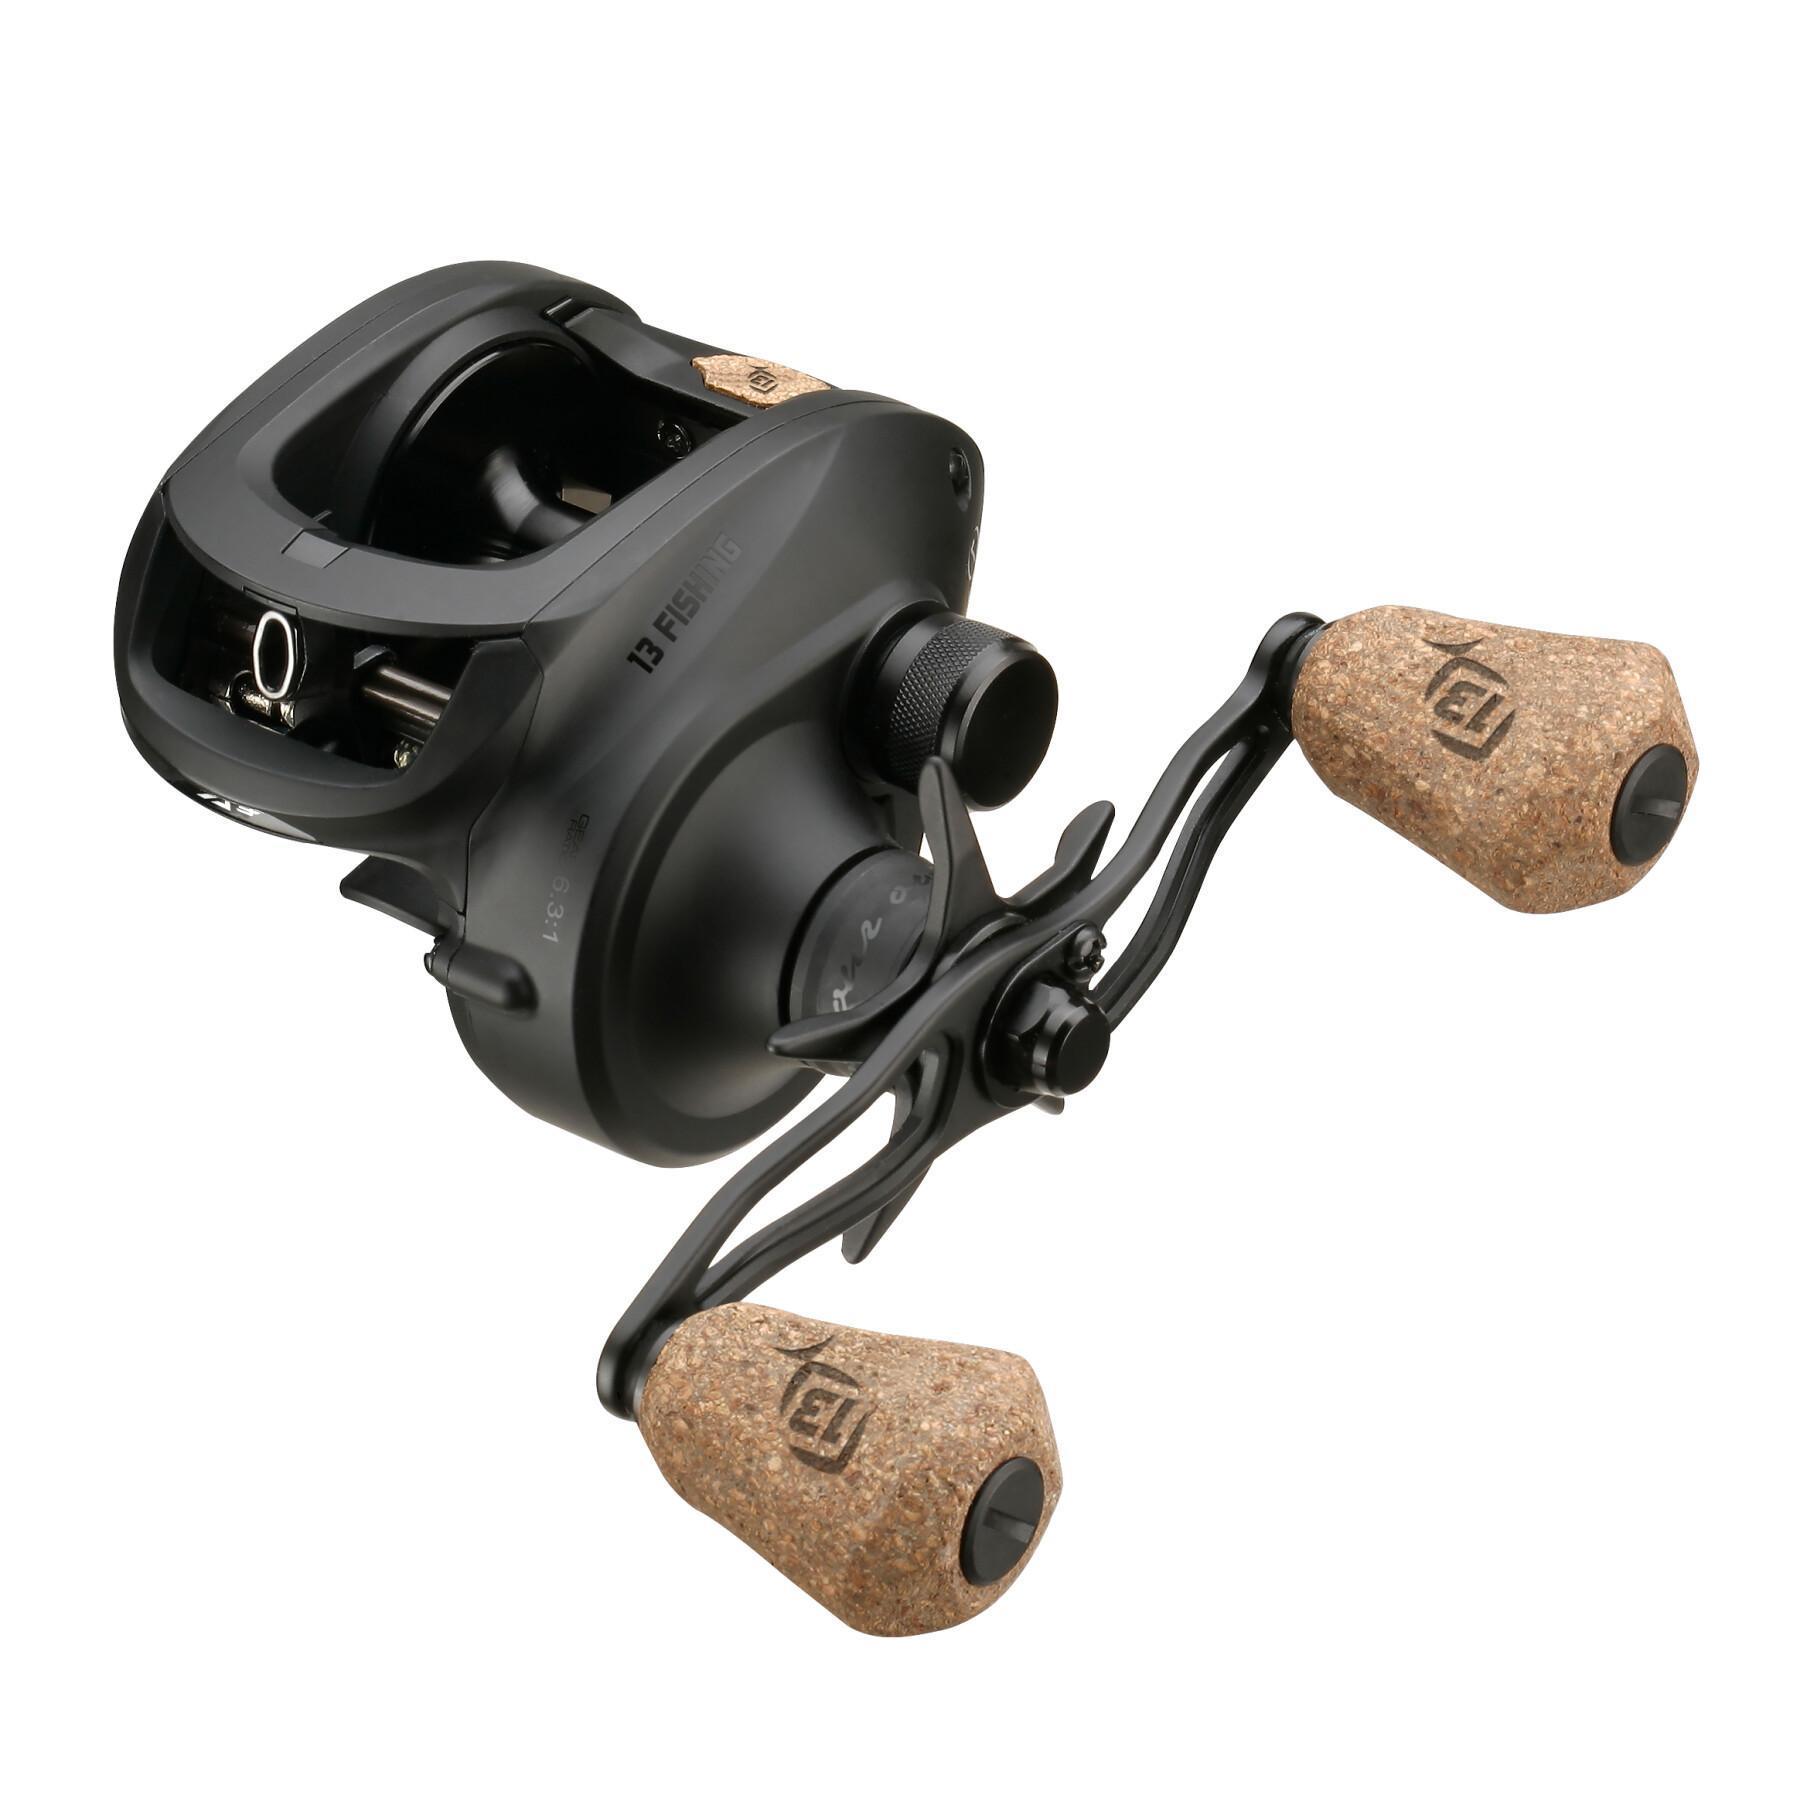 Rulle 13 Fishing Concept A3 - 5.5:1 lh